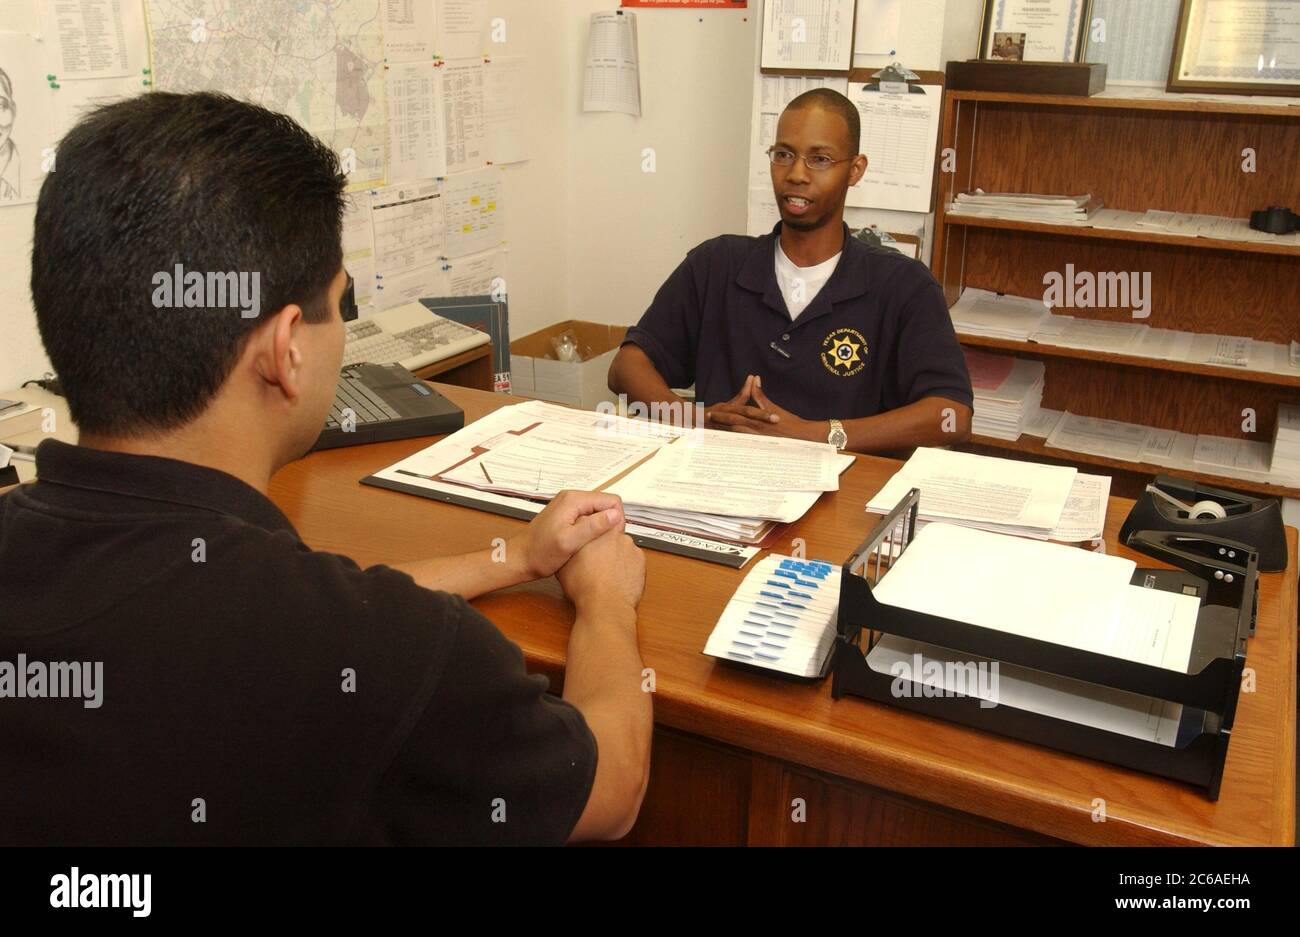 Austin Texas USA, 2003: African-American parole officer meets in his office with Hispanic parolee to discuss staying out of trouble while on parole. Models Released  ©Bob Daemmrich Stock Photo